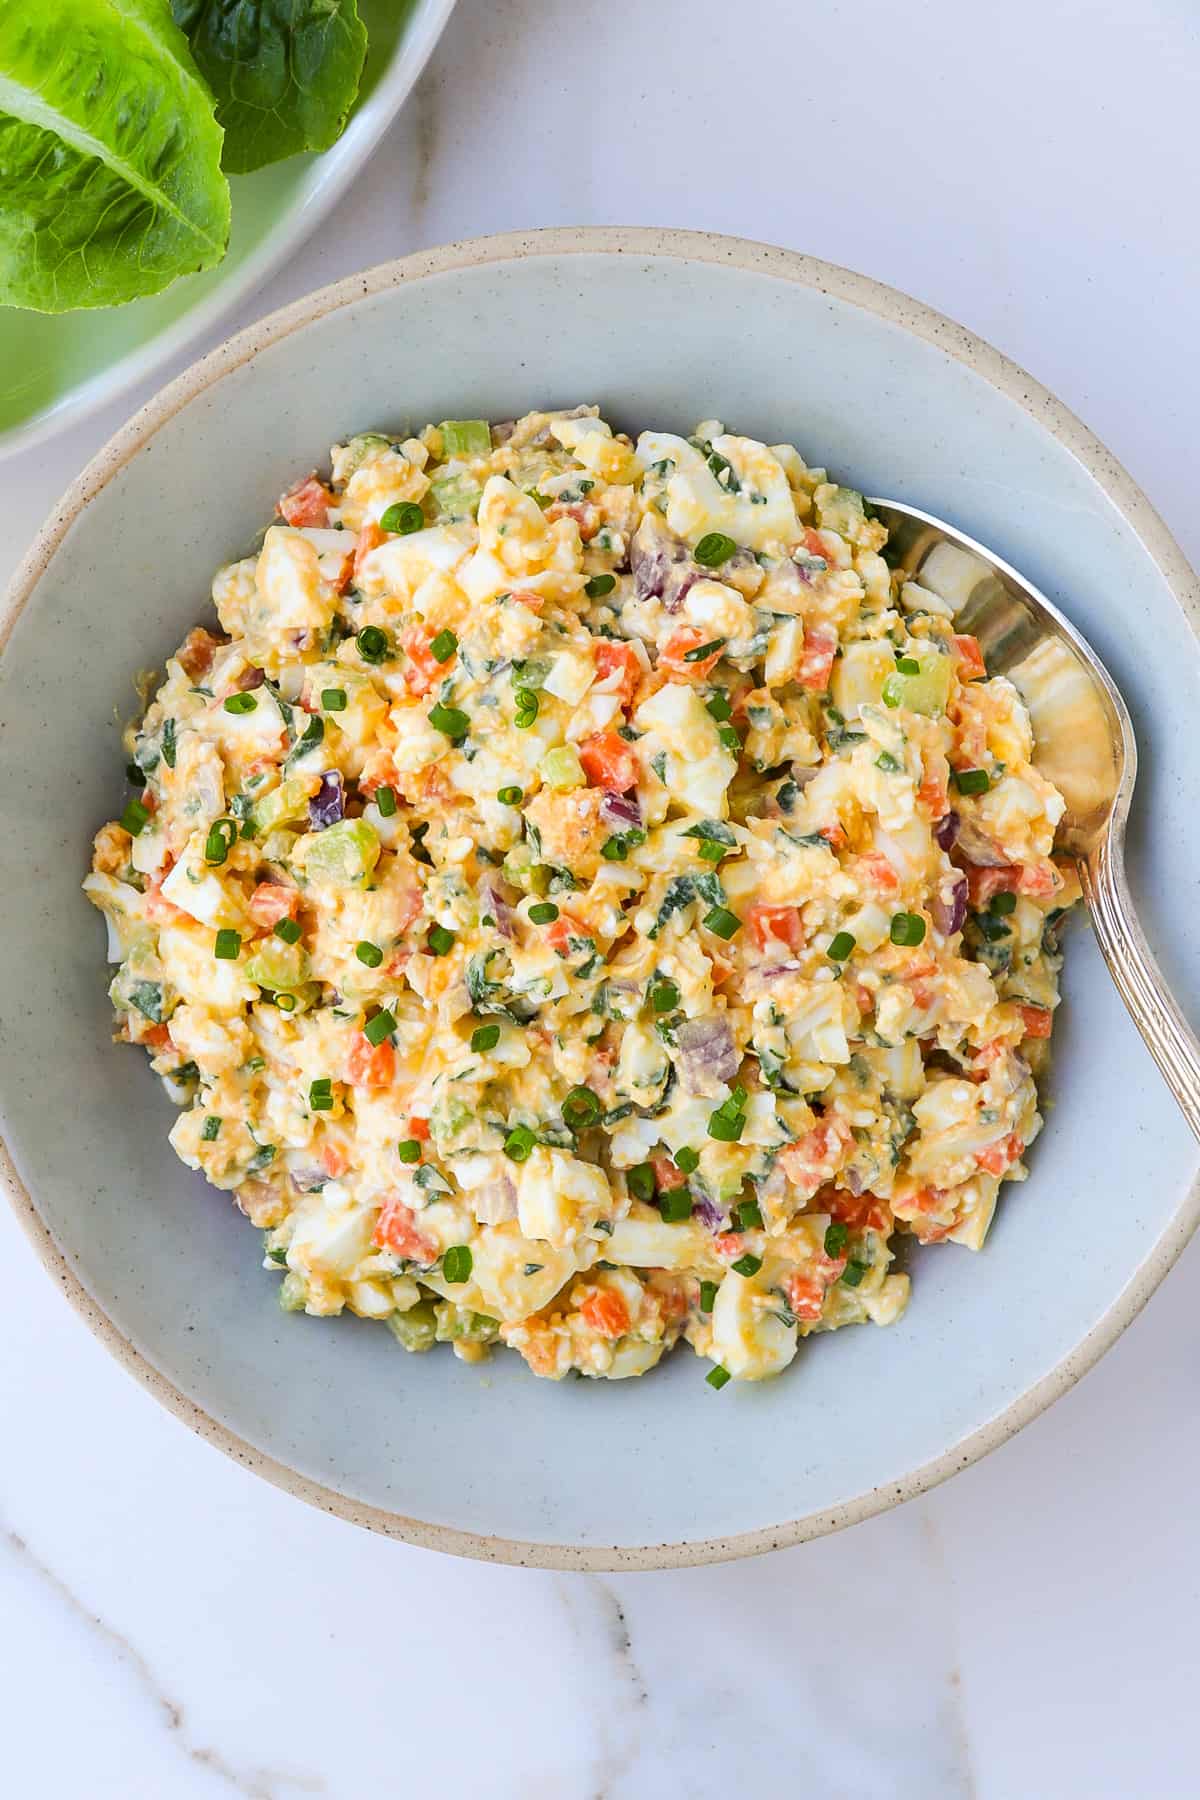 Egg salad in a bowl with a spoon.